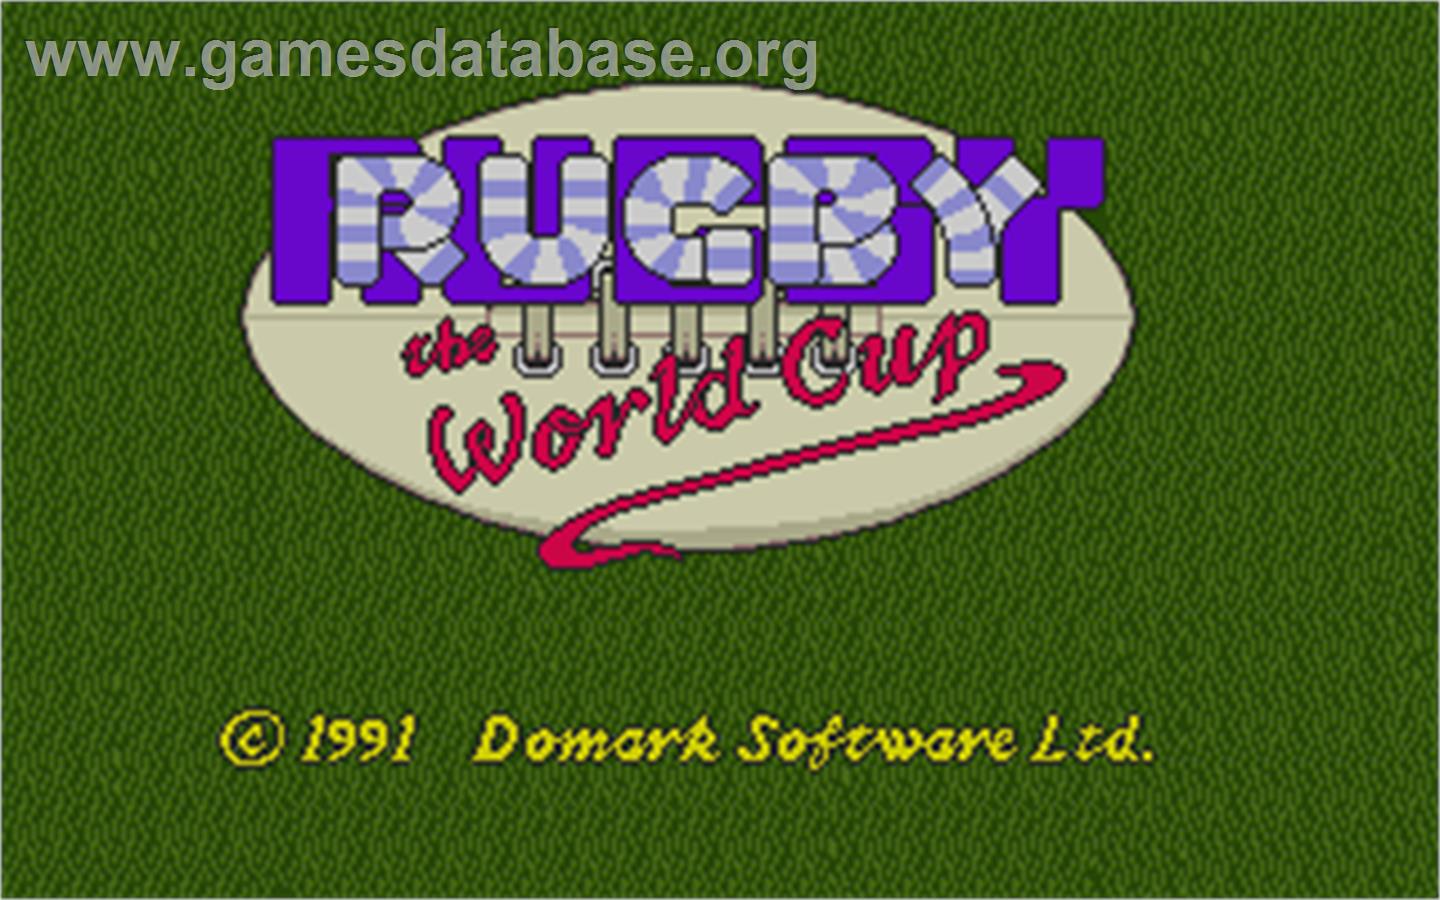 Rugby: The World Cup - Atari ST - Artwork - Title Screen